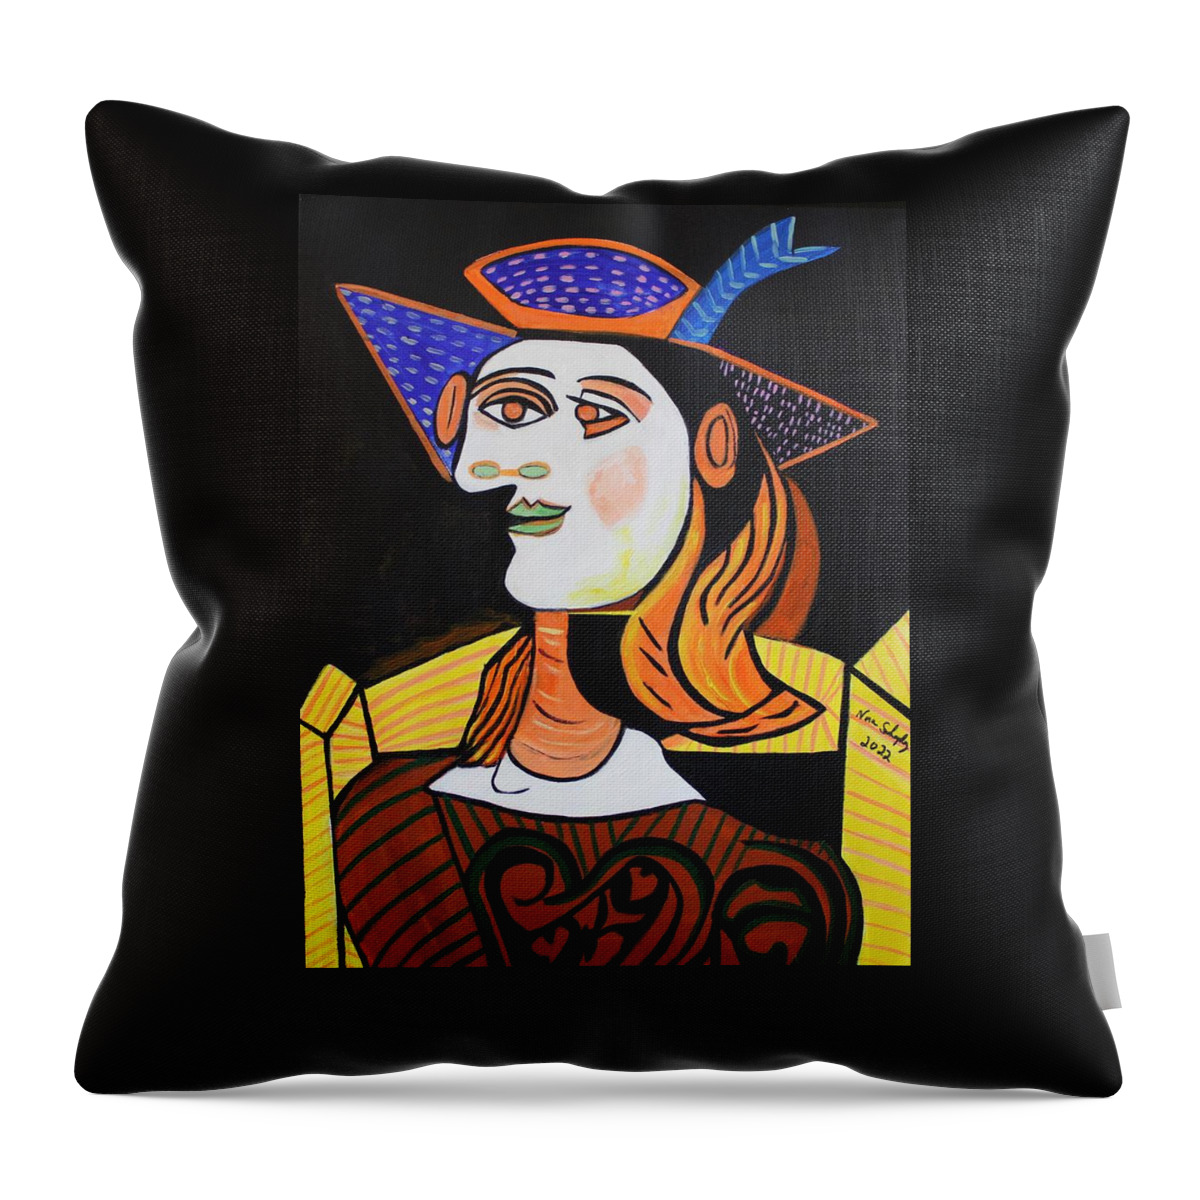 Picasso By Nora Throw Pillow featuring the painting Hair Net Picasso by Nora Shepley